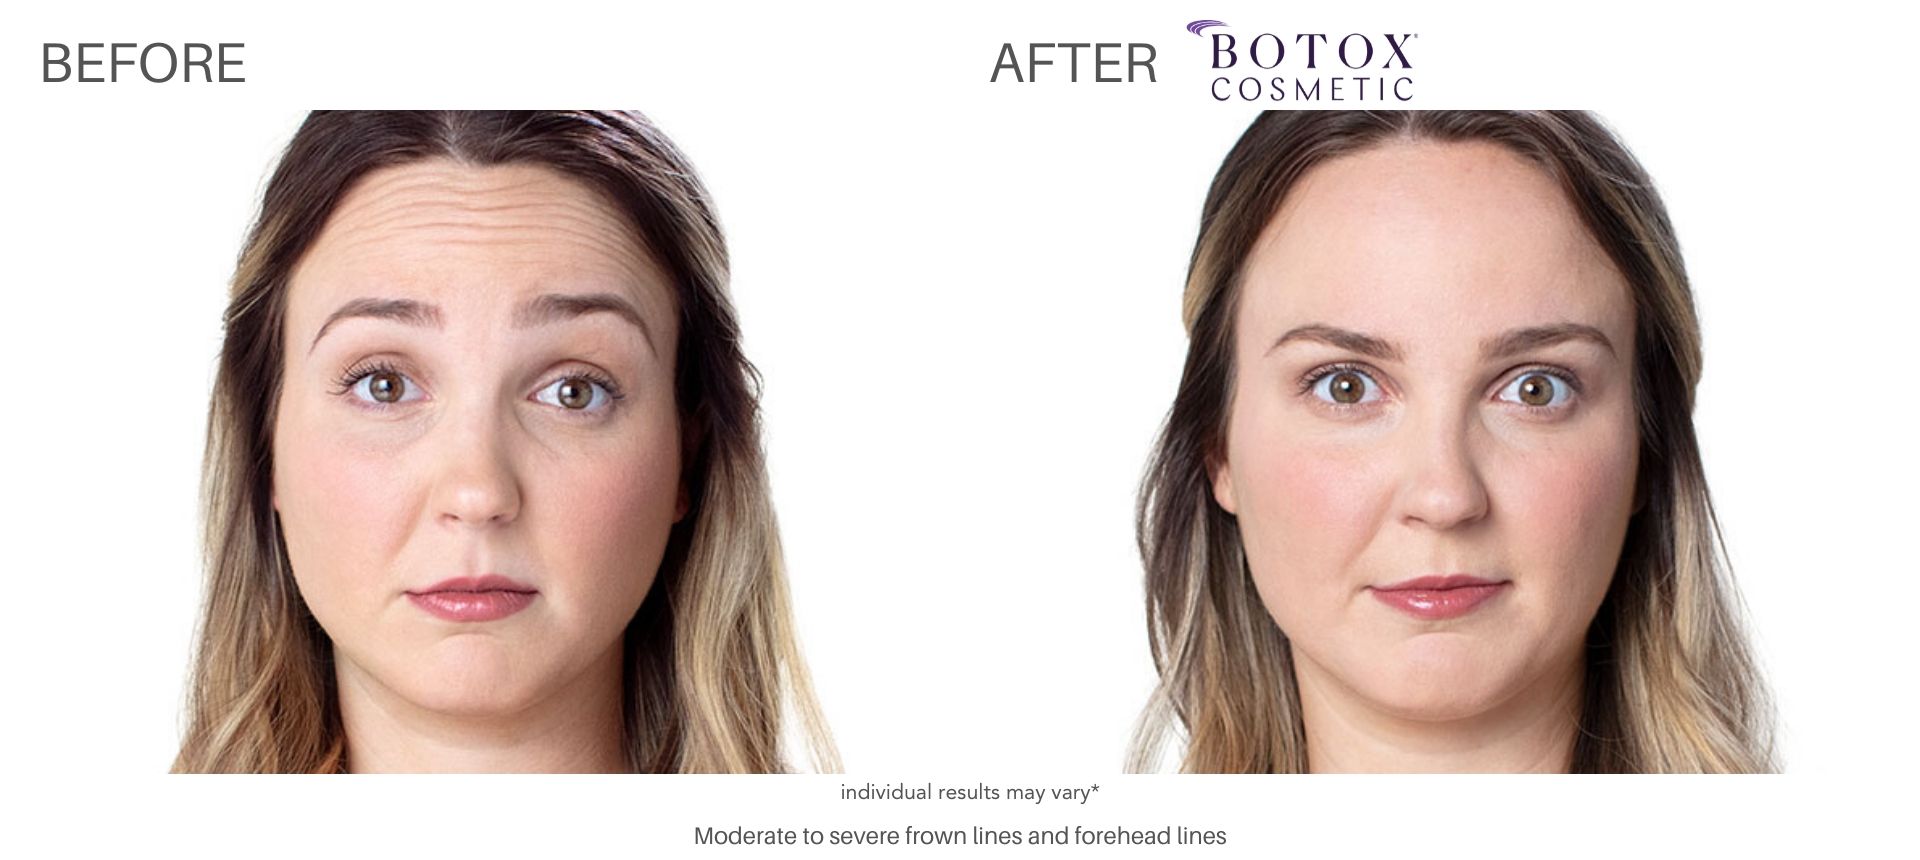 Woman's botox before and after forehead wrinkles treatment.